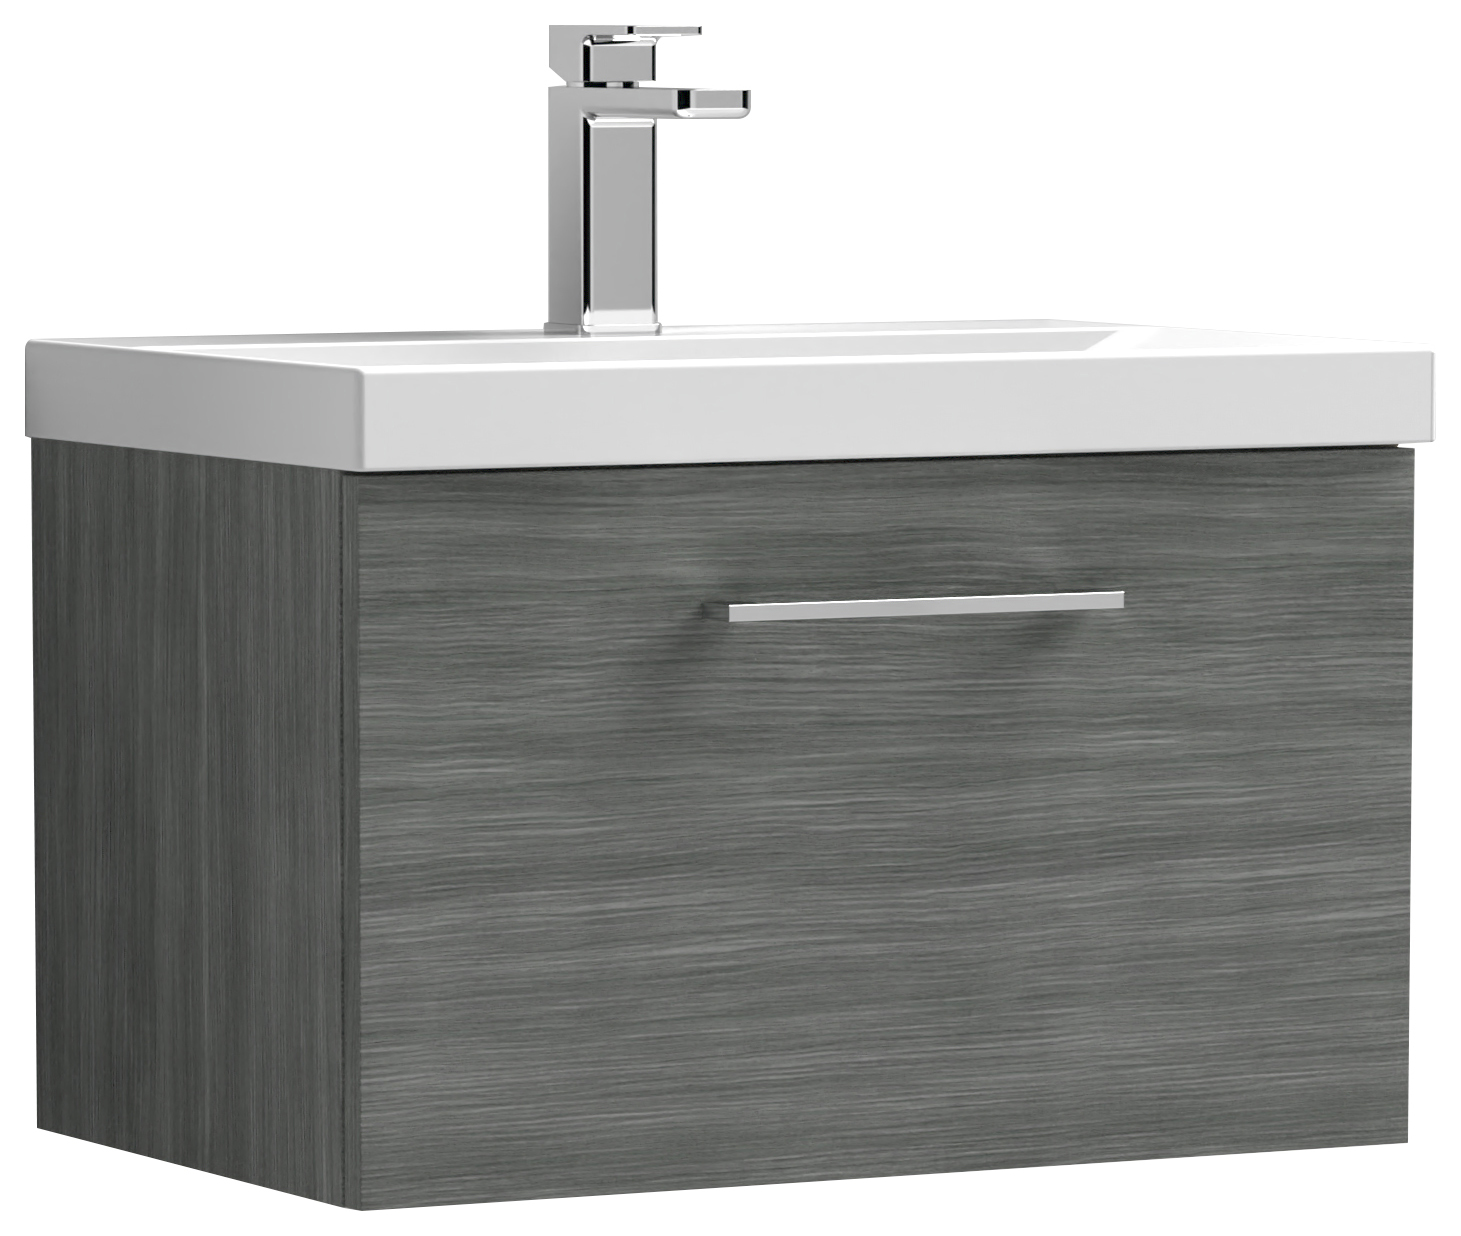 Nuie Arno Anthracite Woodgrain Wall Hung 1 Drawer Vanity Unit & Basin - 390 x 610mm